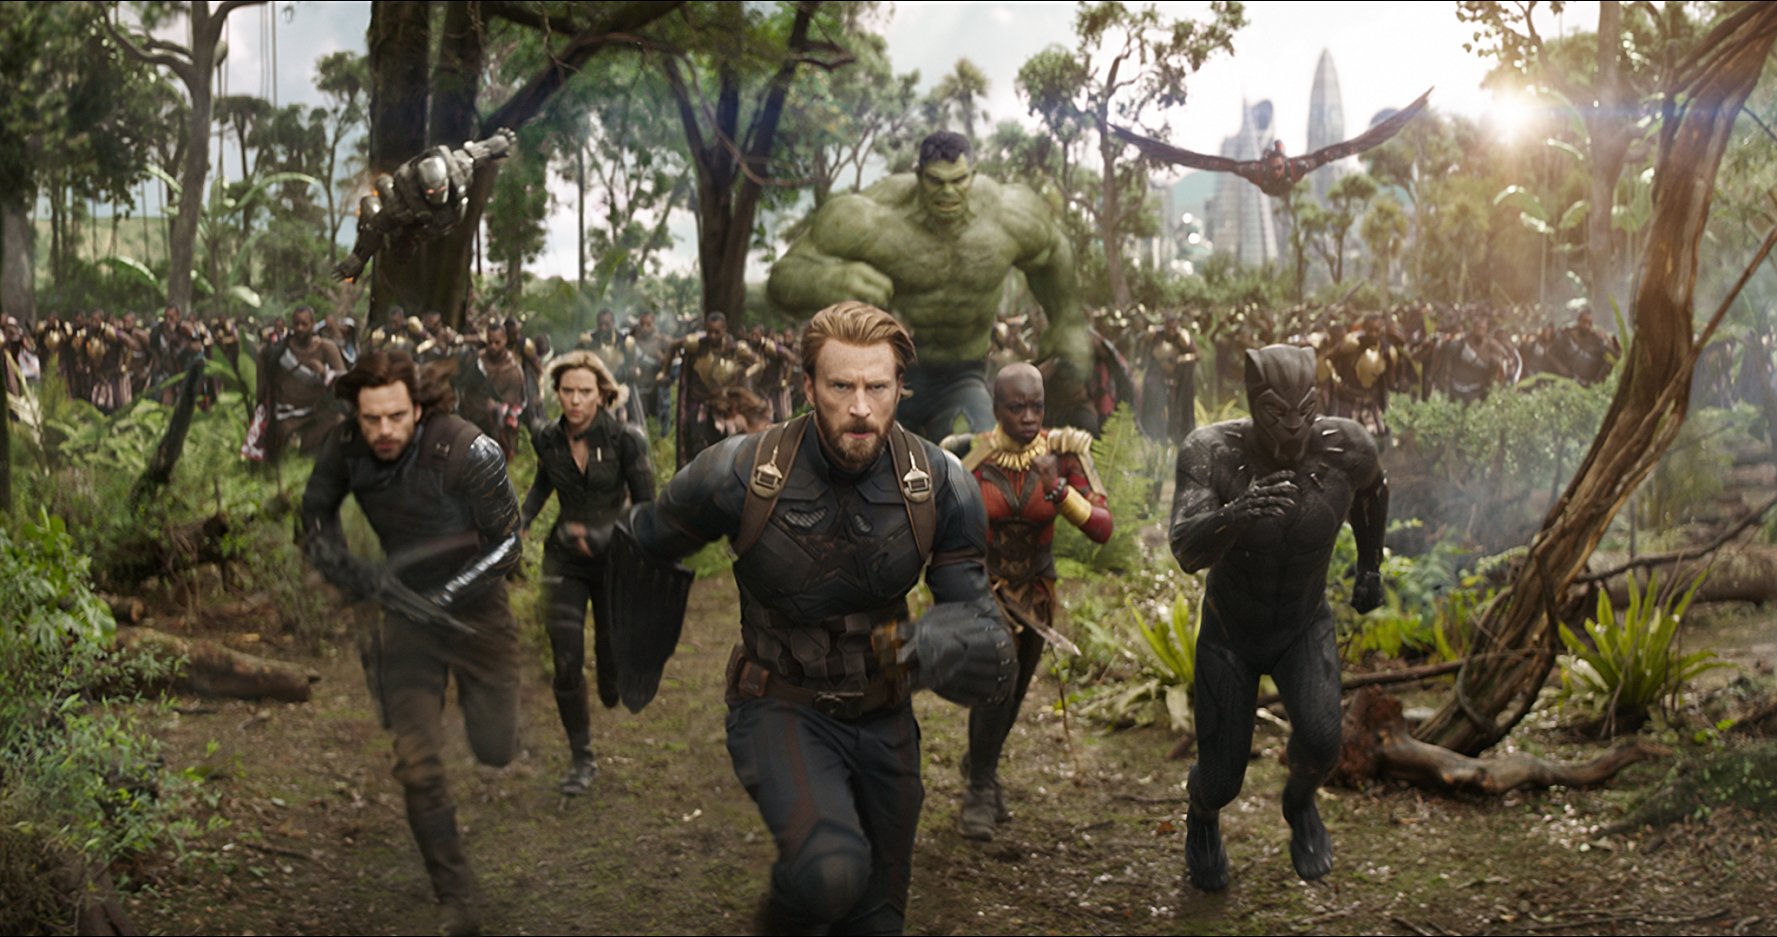 Avengers: Infinity War movie still that never appears in the movie